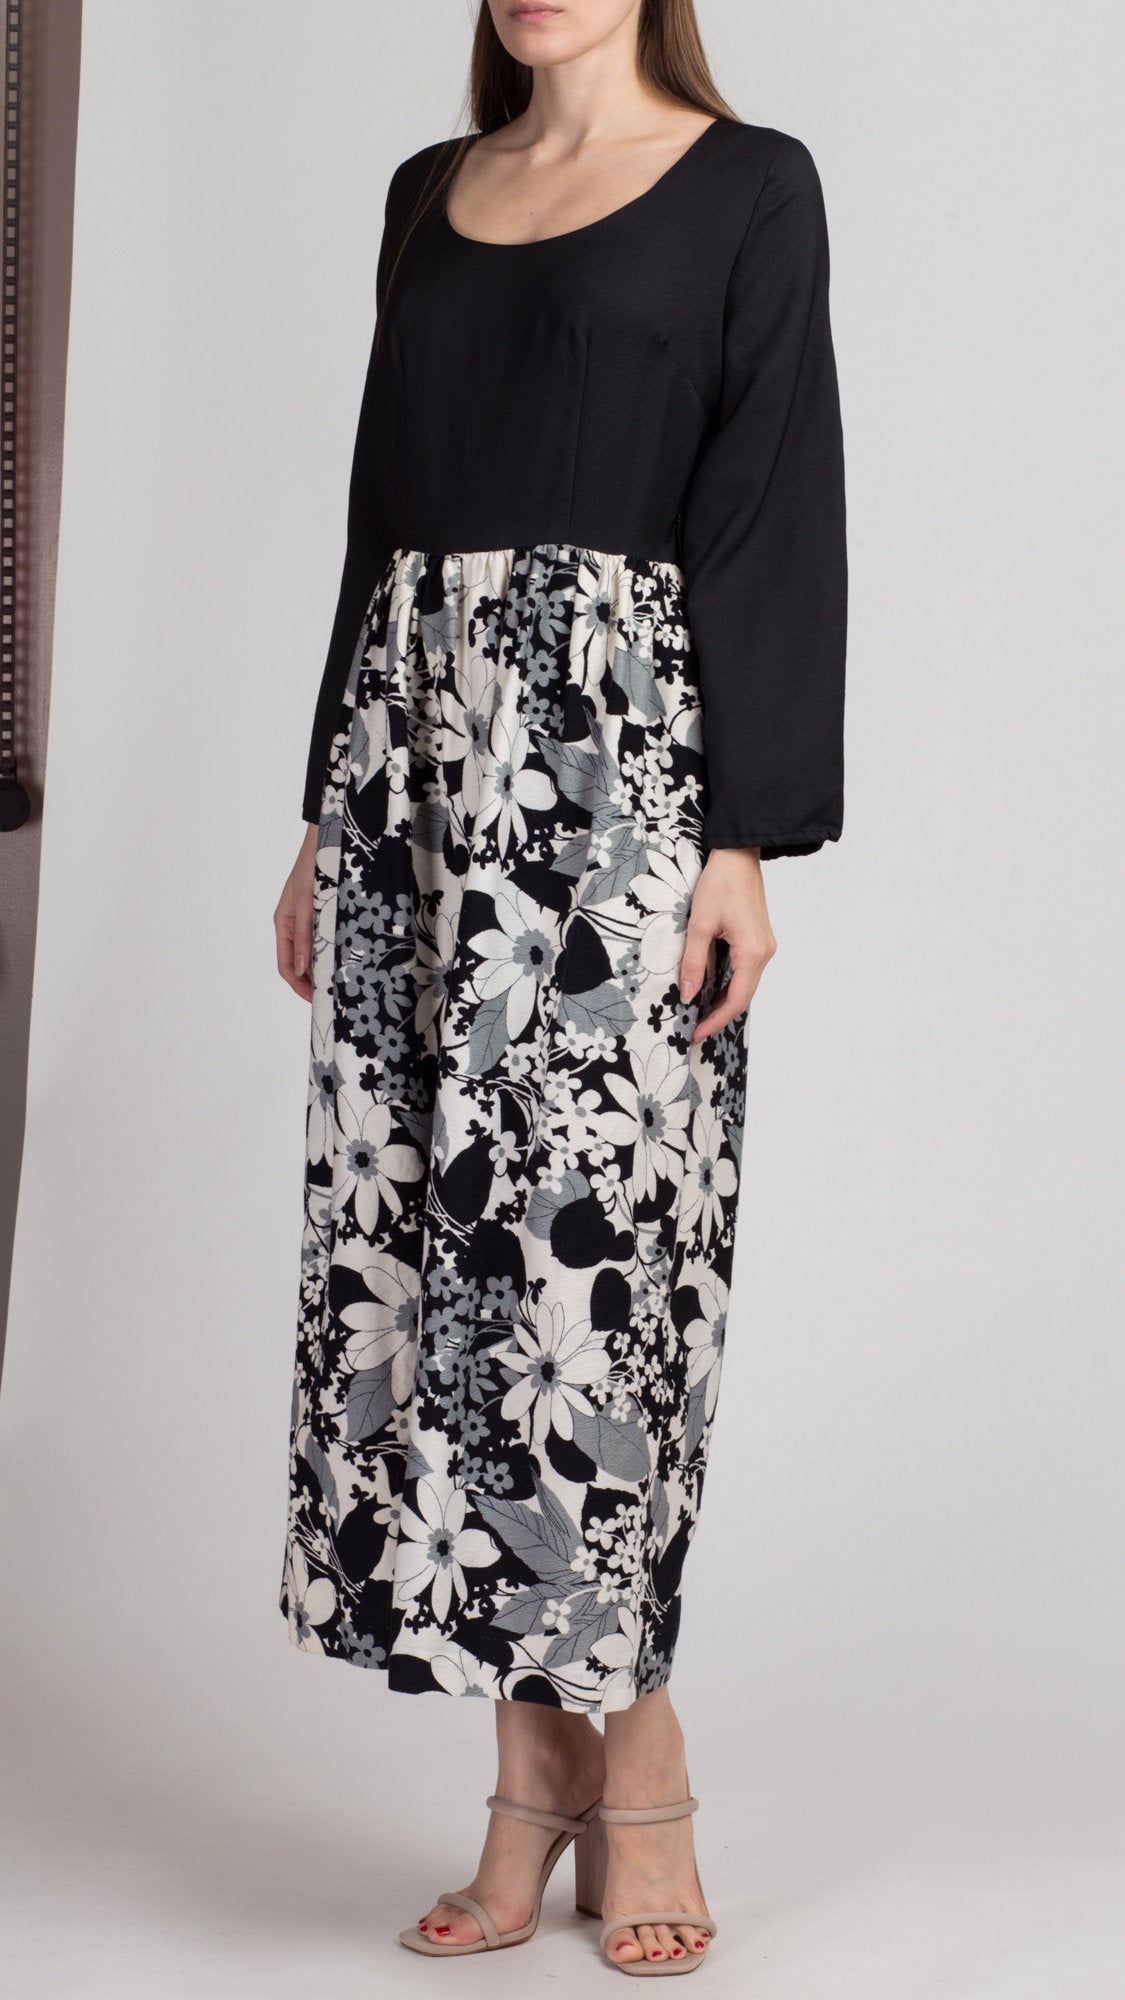 70s Black & White Floral Maxi Dress - Medium to Large | Vintage Long Sleeve Two Tone A Line Dress